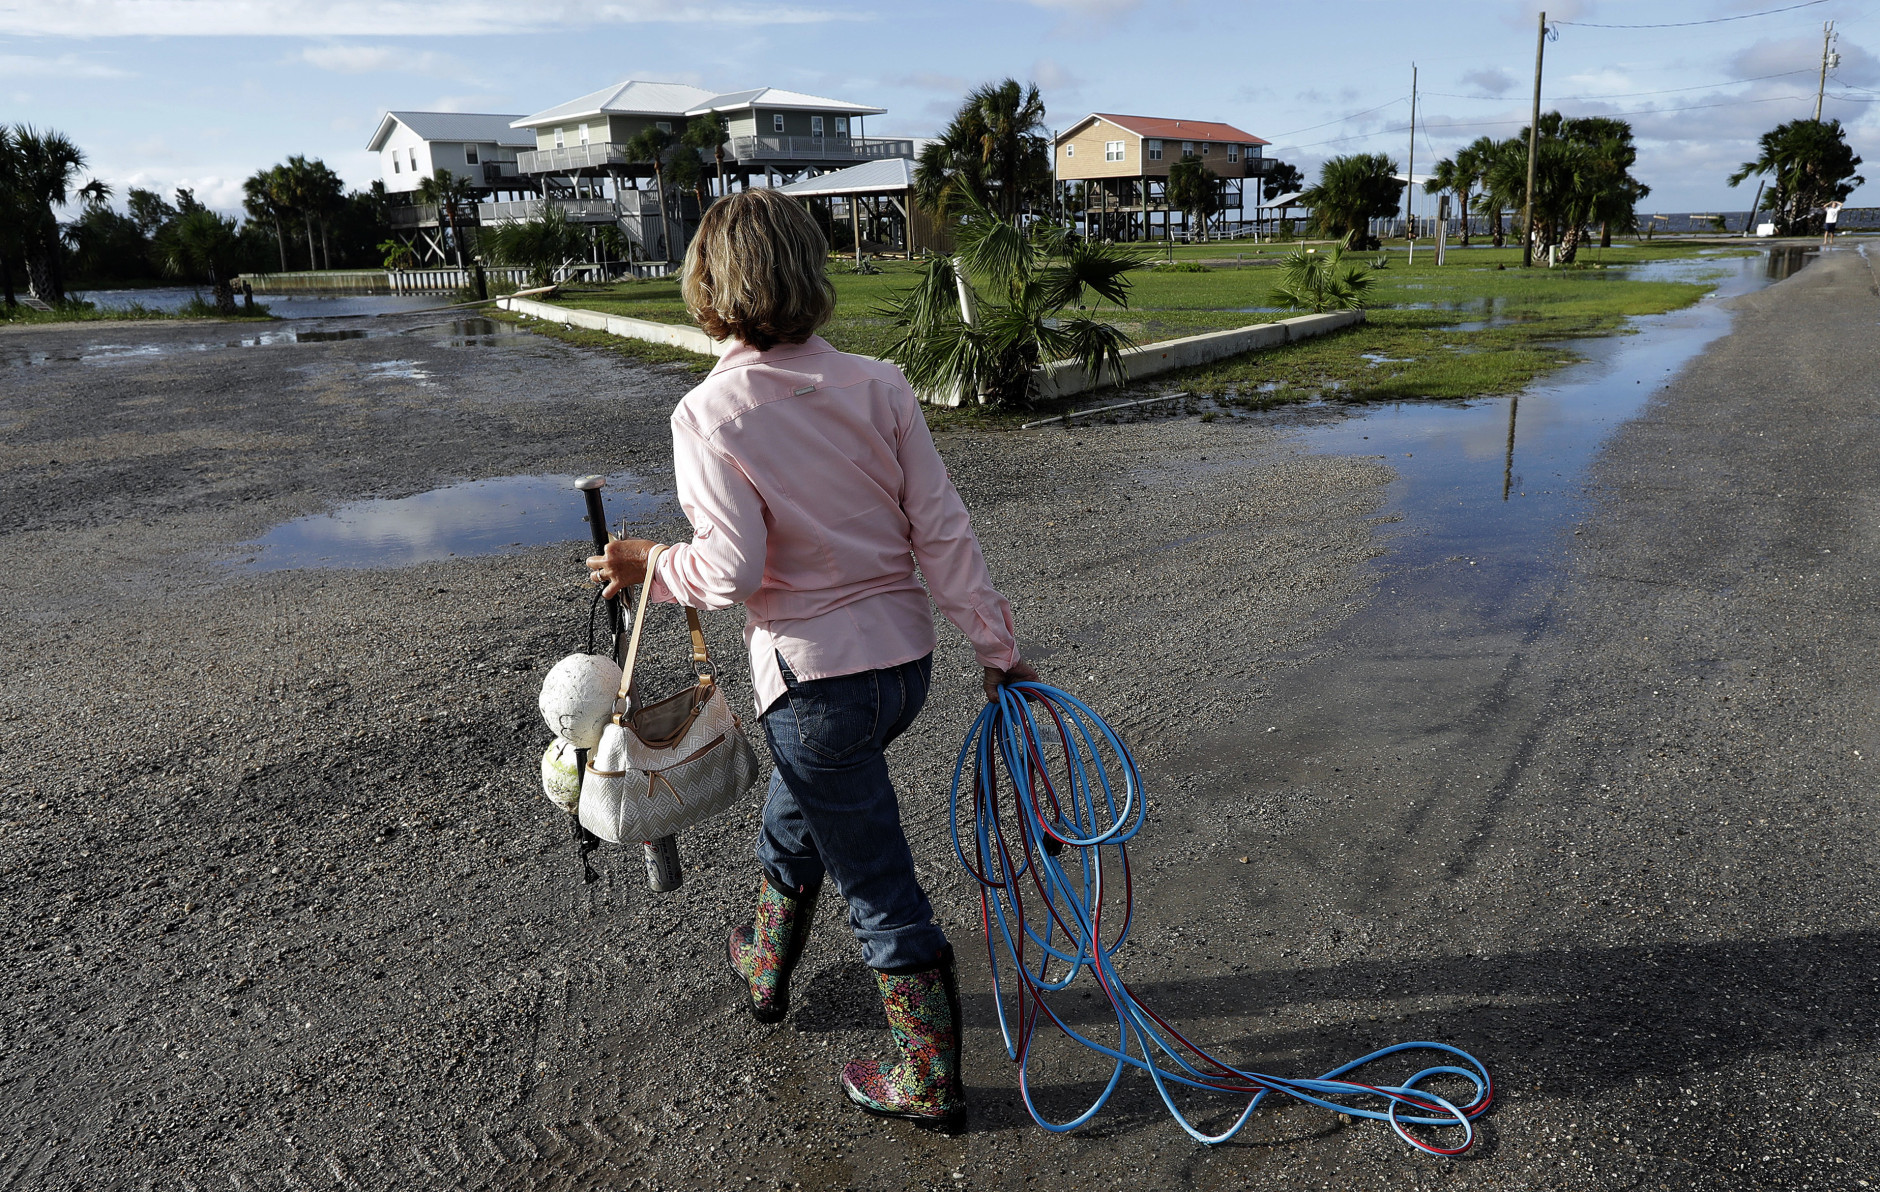 Nancy Geohagen picks up some of her belongings after her home was damaged by Hurricane Hermine when it came ashore Friday, Sept. 2, 2016, in , Fla.  Hermine was downgraded to a tropical storm after it made landfall, as it moves over Georgia, but the U.S. National Hurricane Center says winds are increasing along the Southeast coast and flooding rains continue.  (AP Photo/Chris O'Meara)